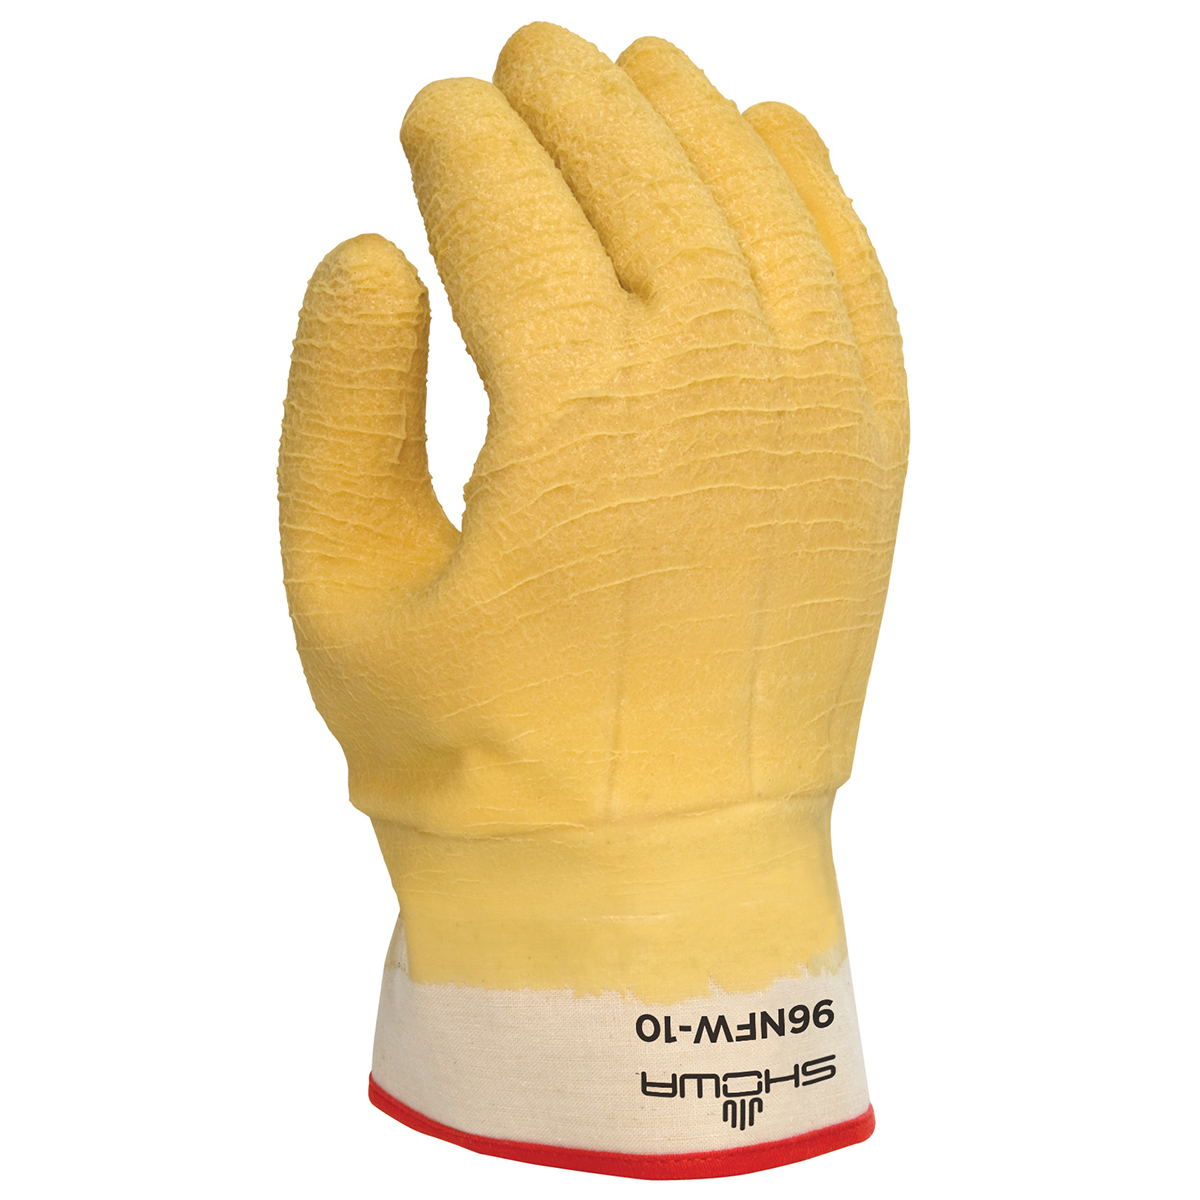 SHOWA® Size 10 Yellow Natural Rubber Cotton/Foam Insulation Lined Cold Weather Gloves